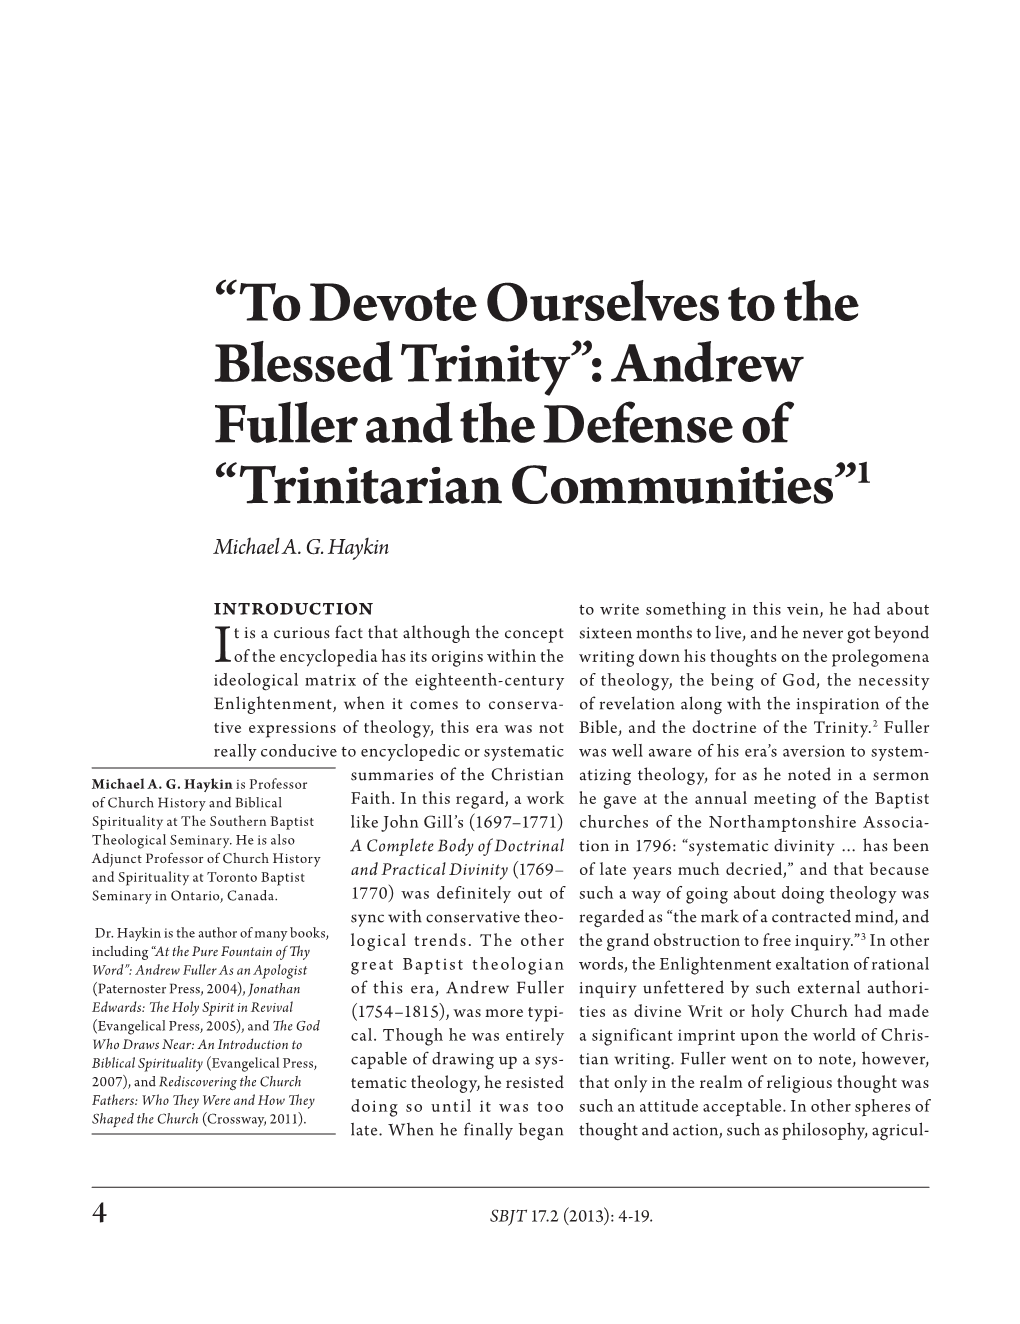 Andrew Fuller and the Defense of “Trinitarian Communities”1 Michael A